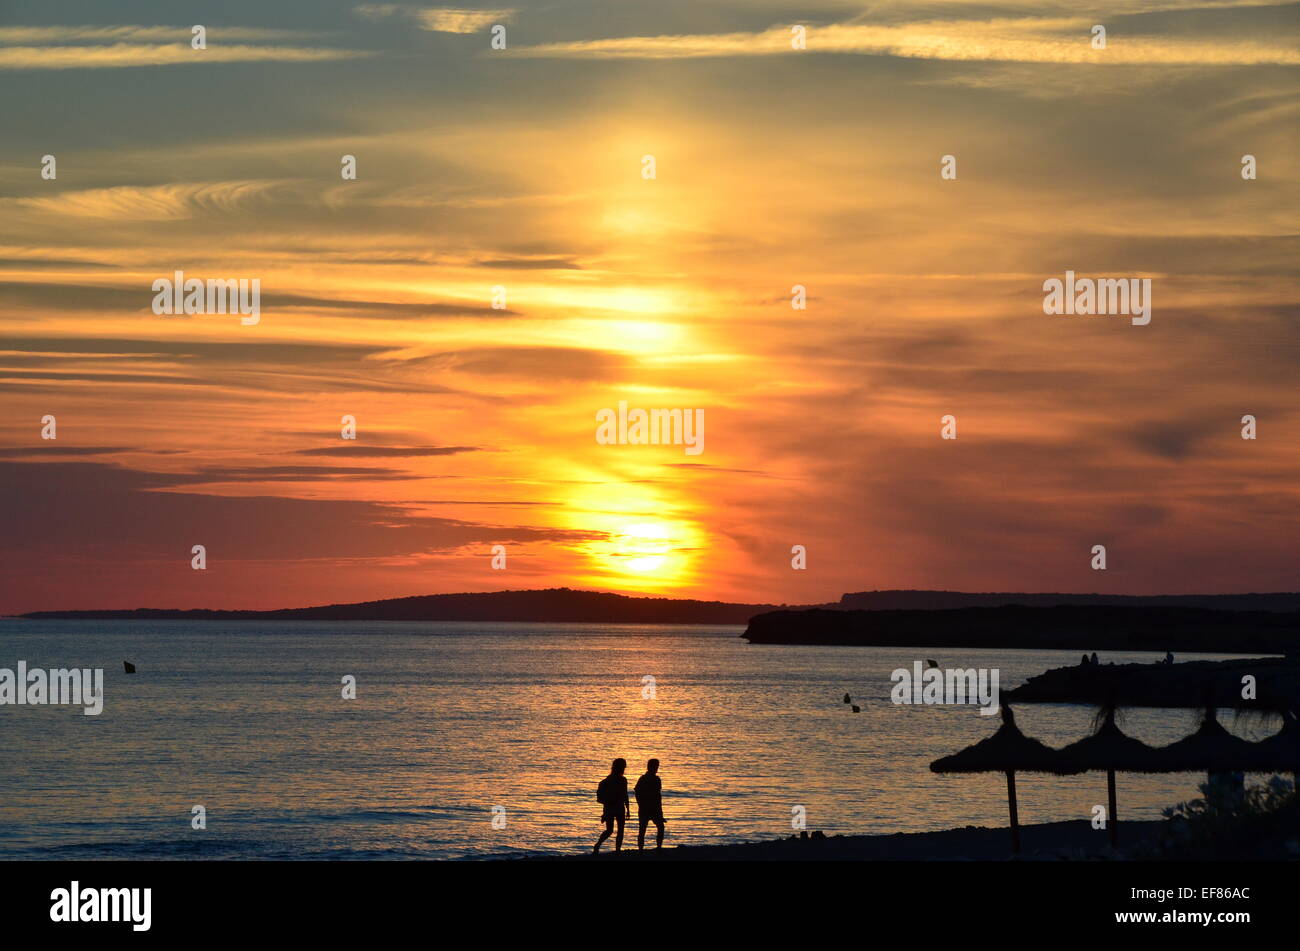 View of the sun setting from the beach at Santo Thomas, Menorca, Balearic Islands, Spain Stock Photo